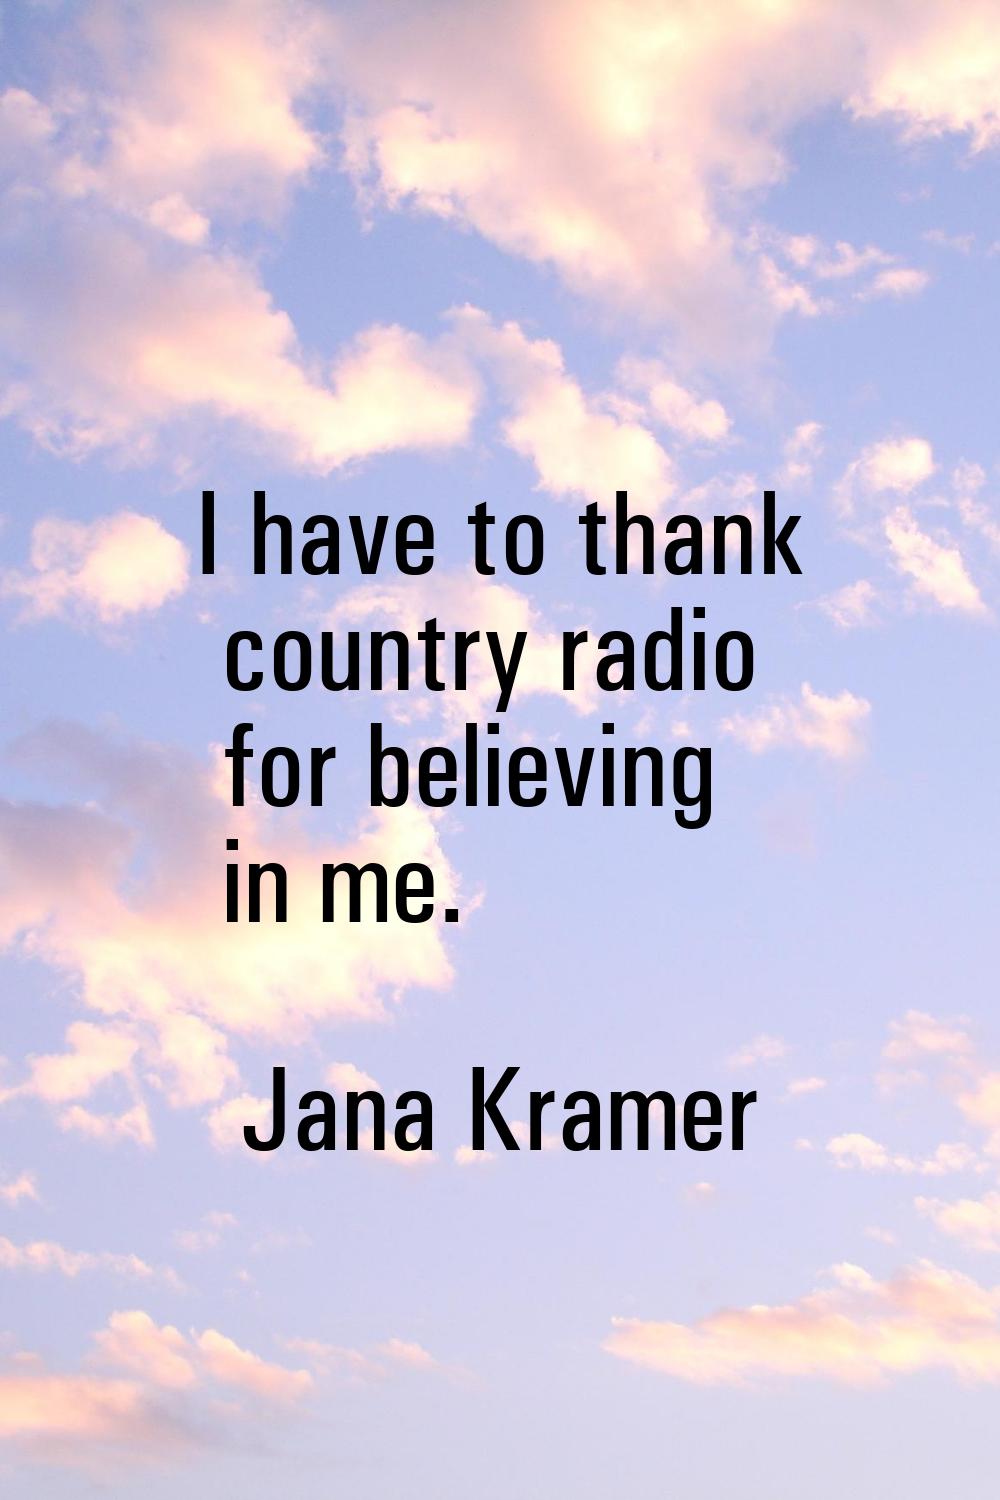 I have to thank country radio for believing in me.